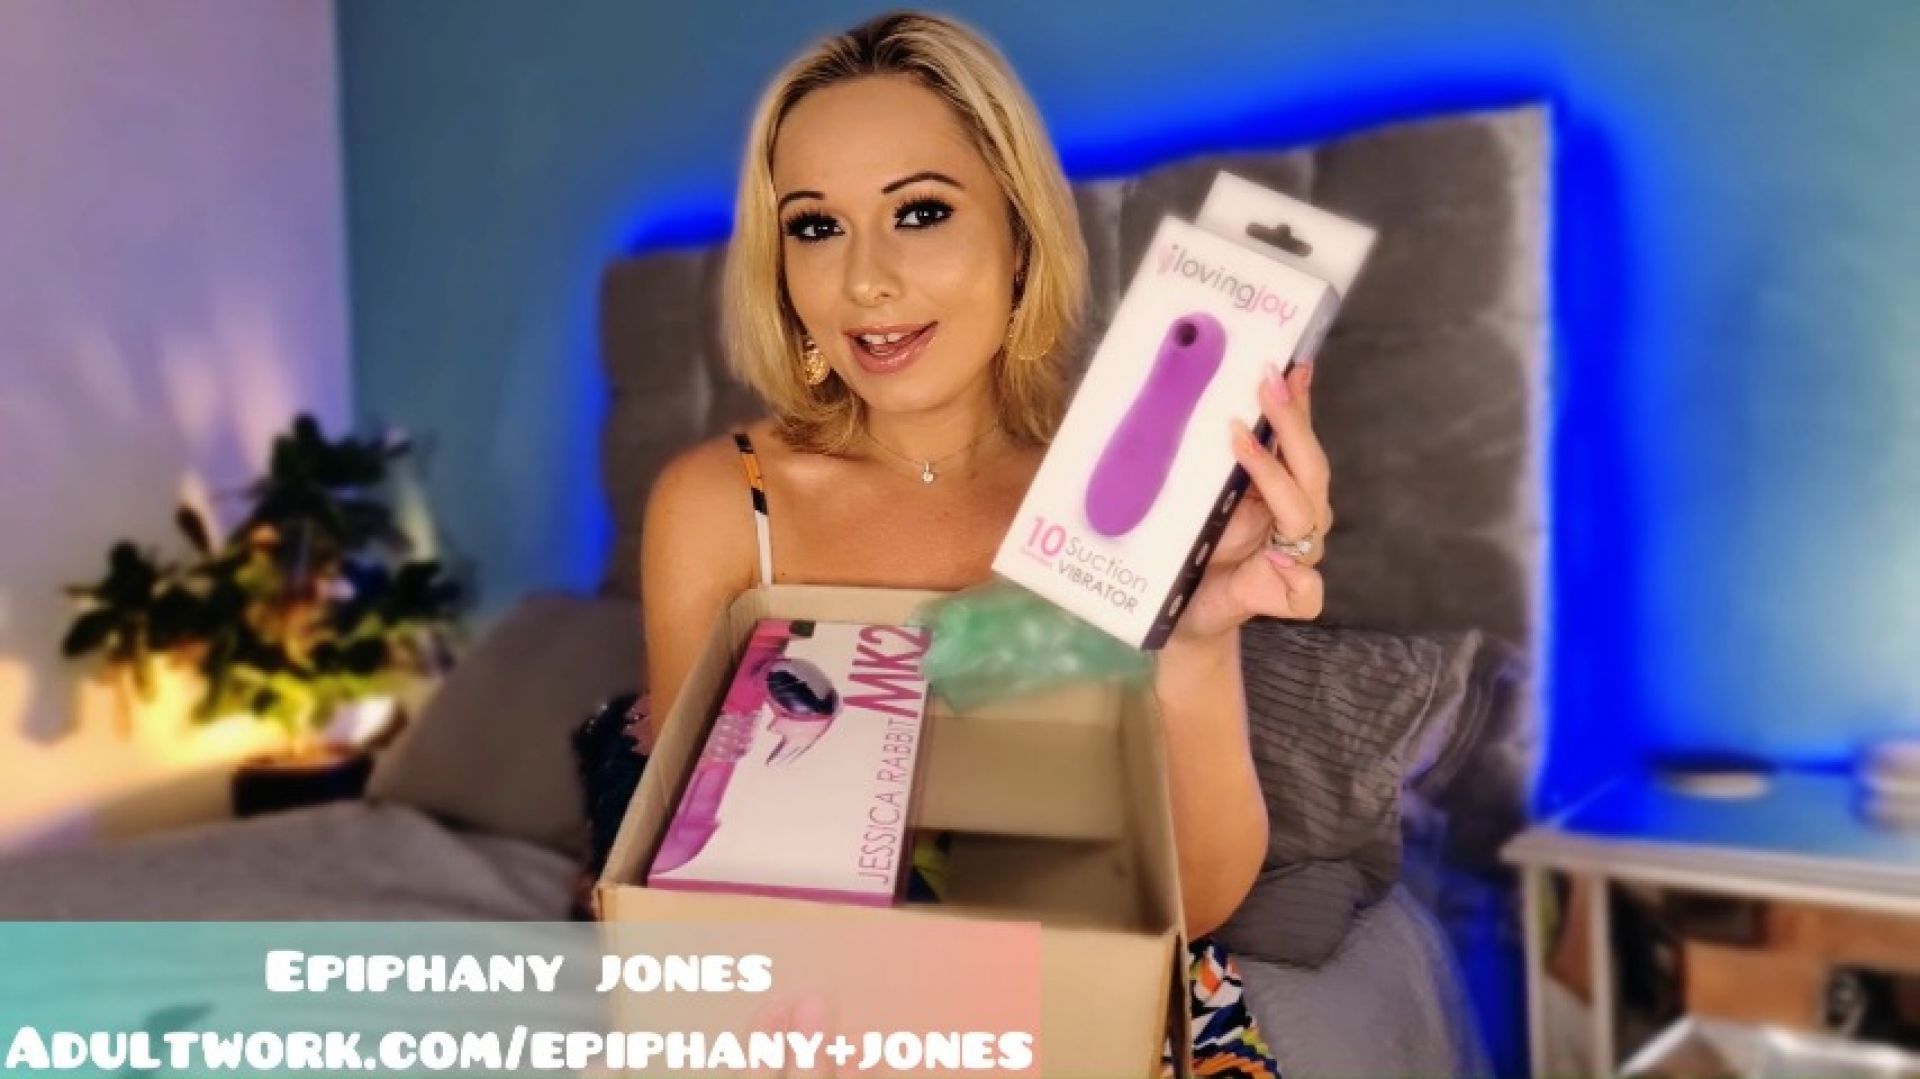 Free Epiphany Jones sex toy unboxing and review SFW